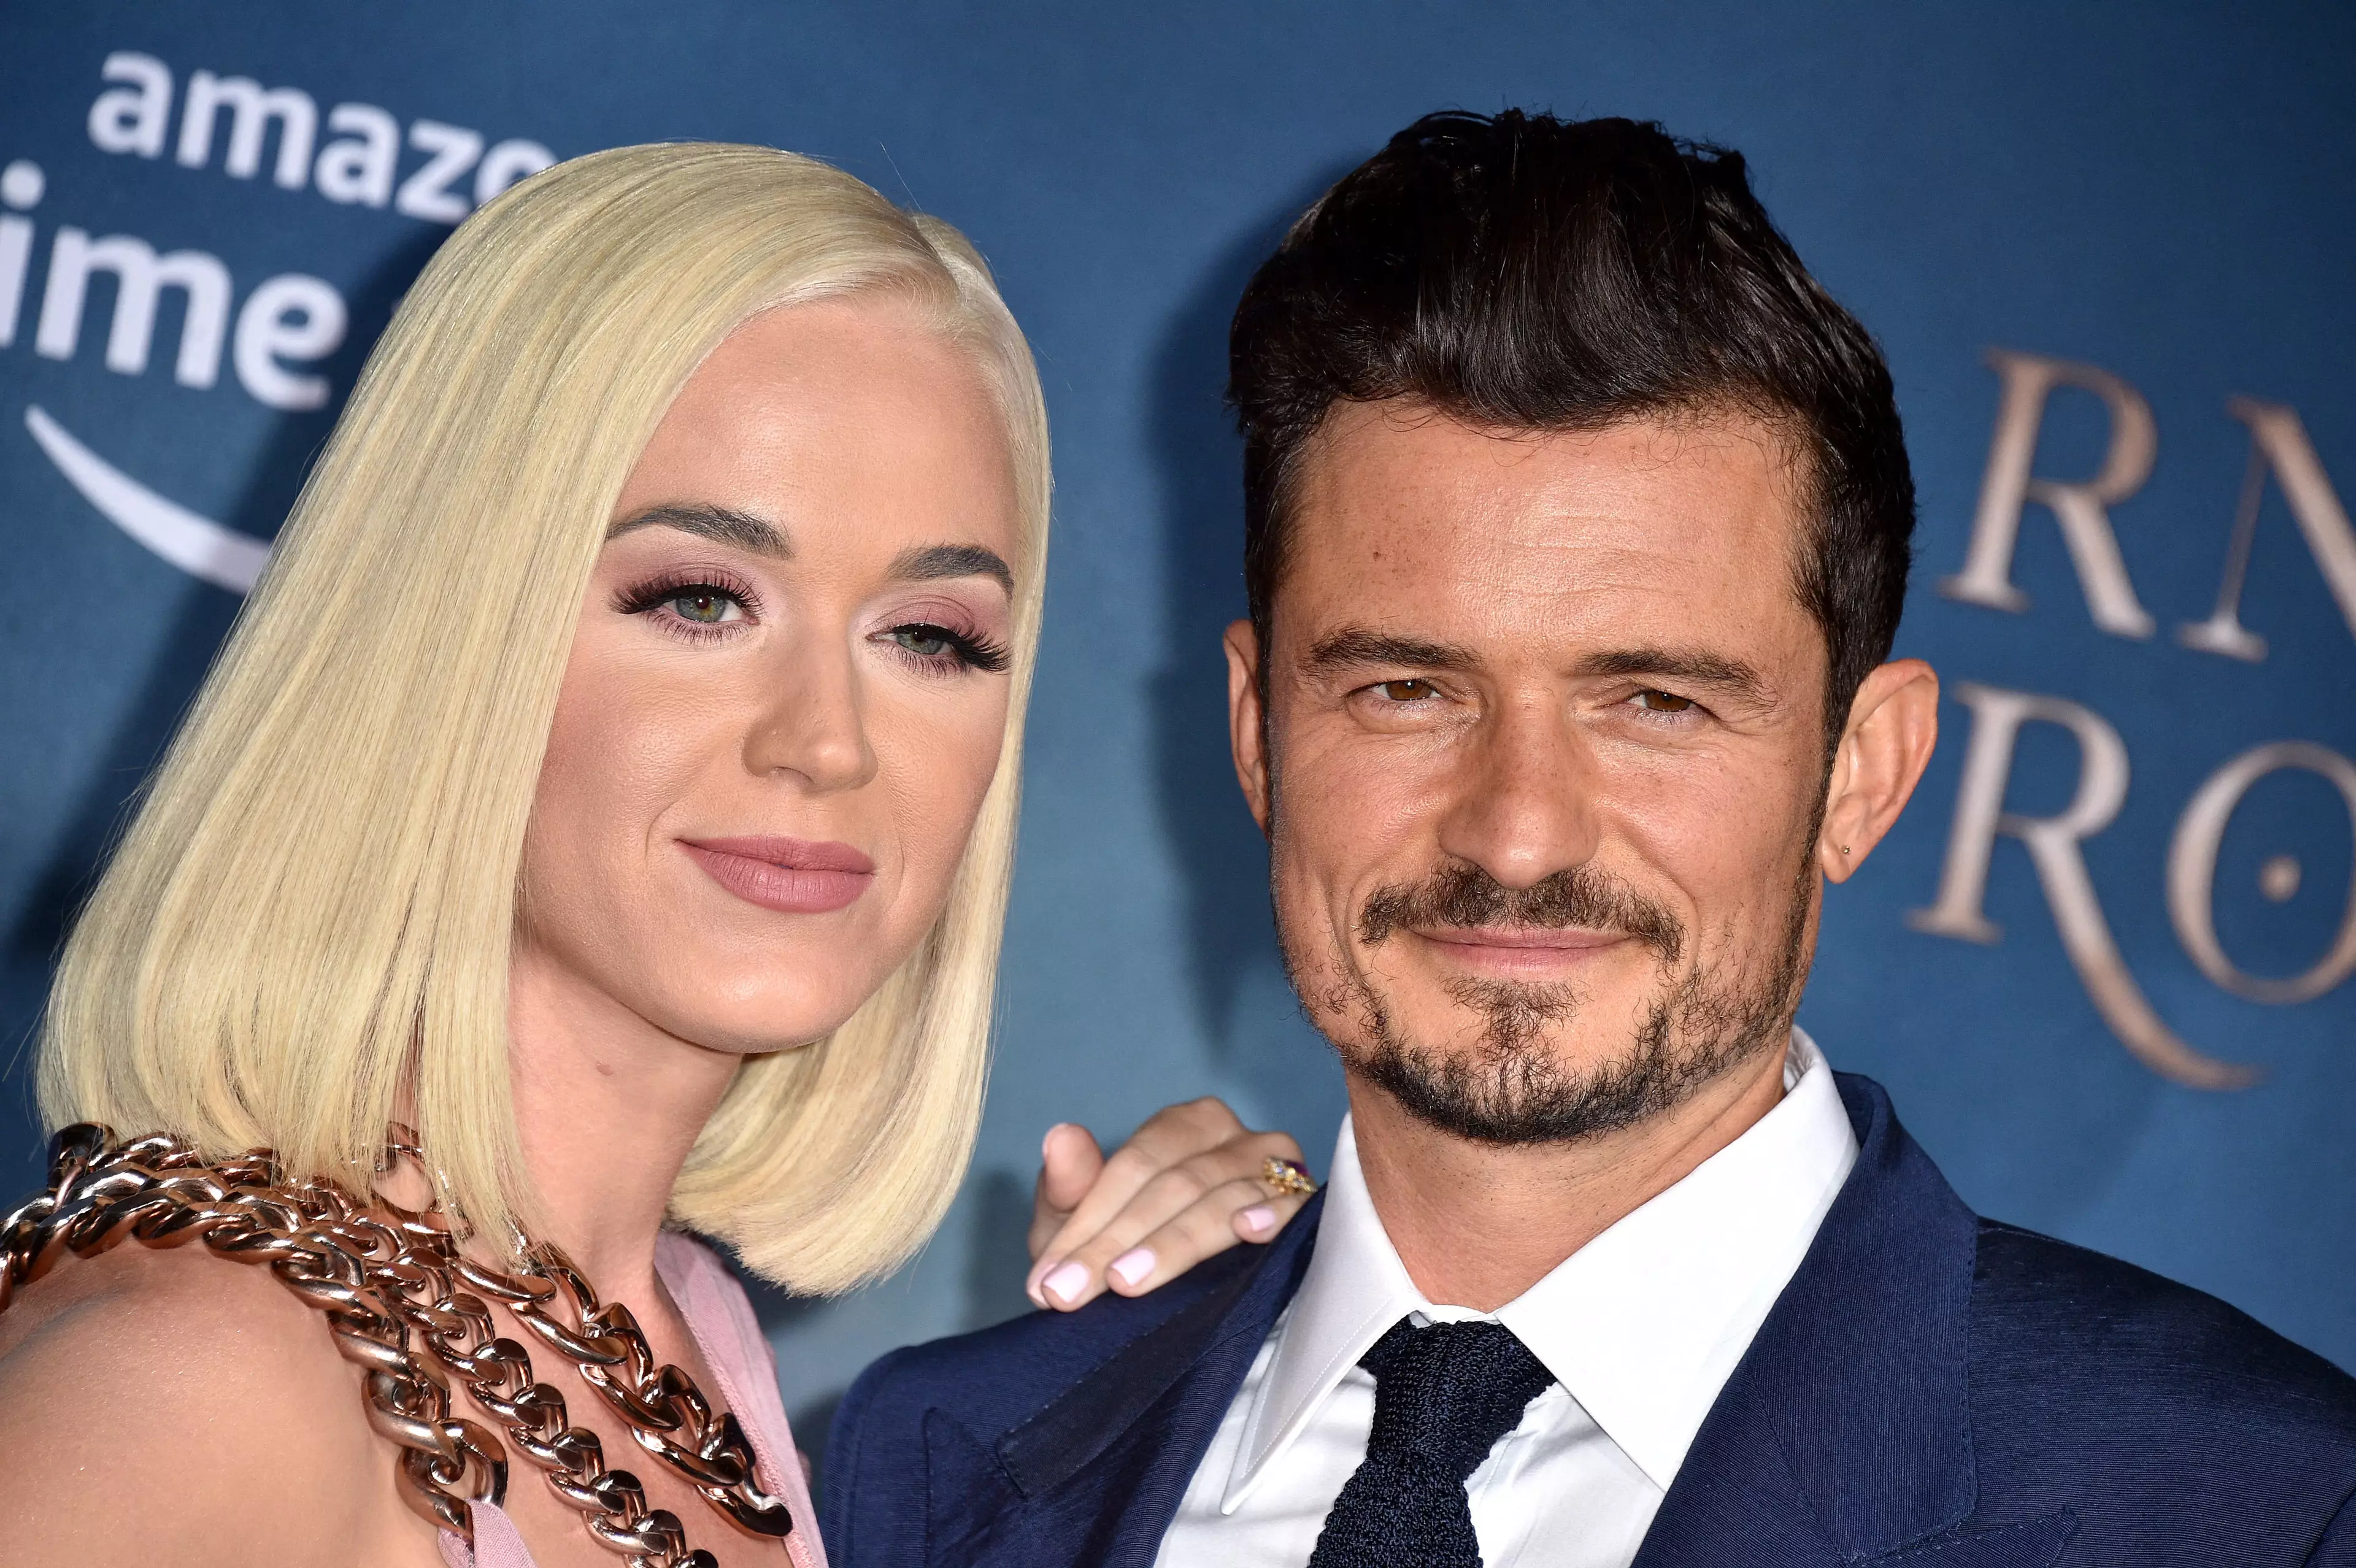 Orlando Bloom is engaged to Katy Perry.